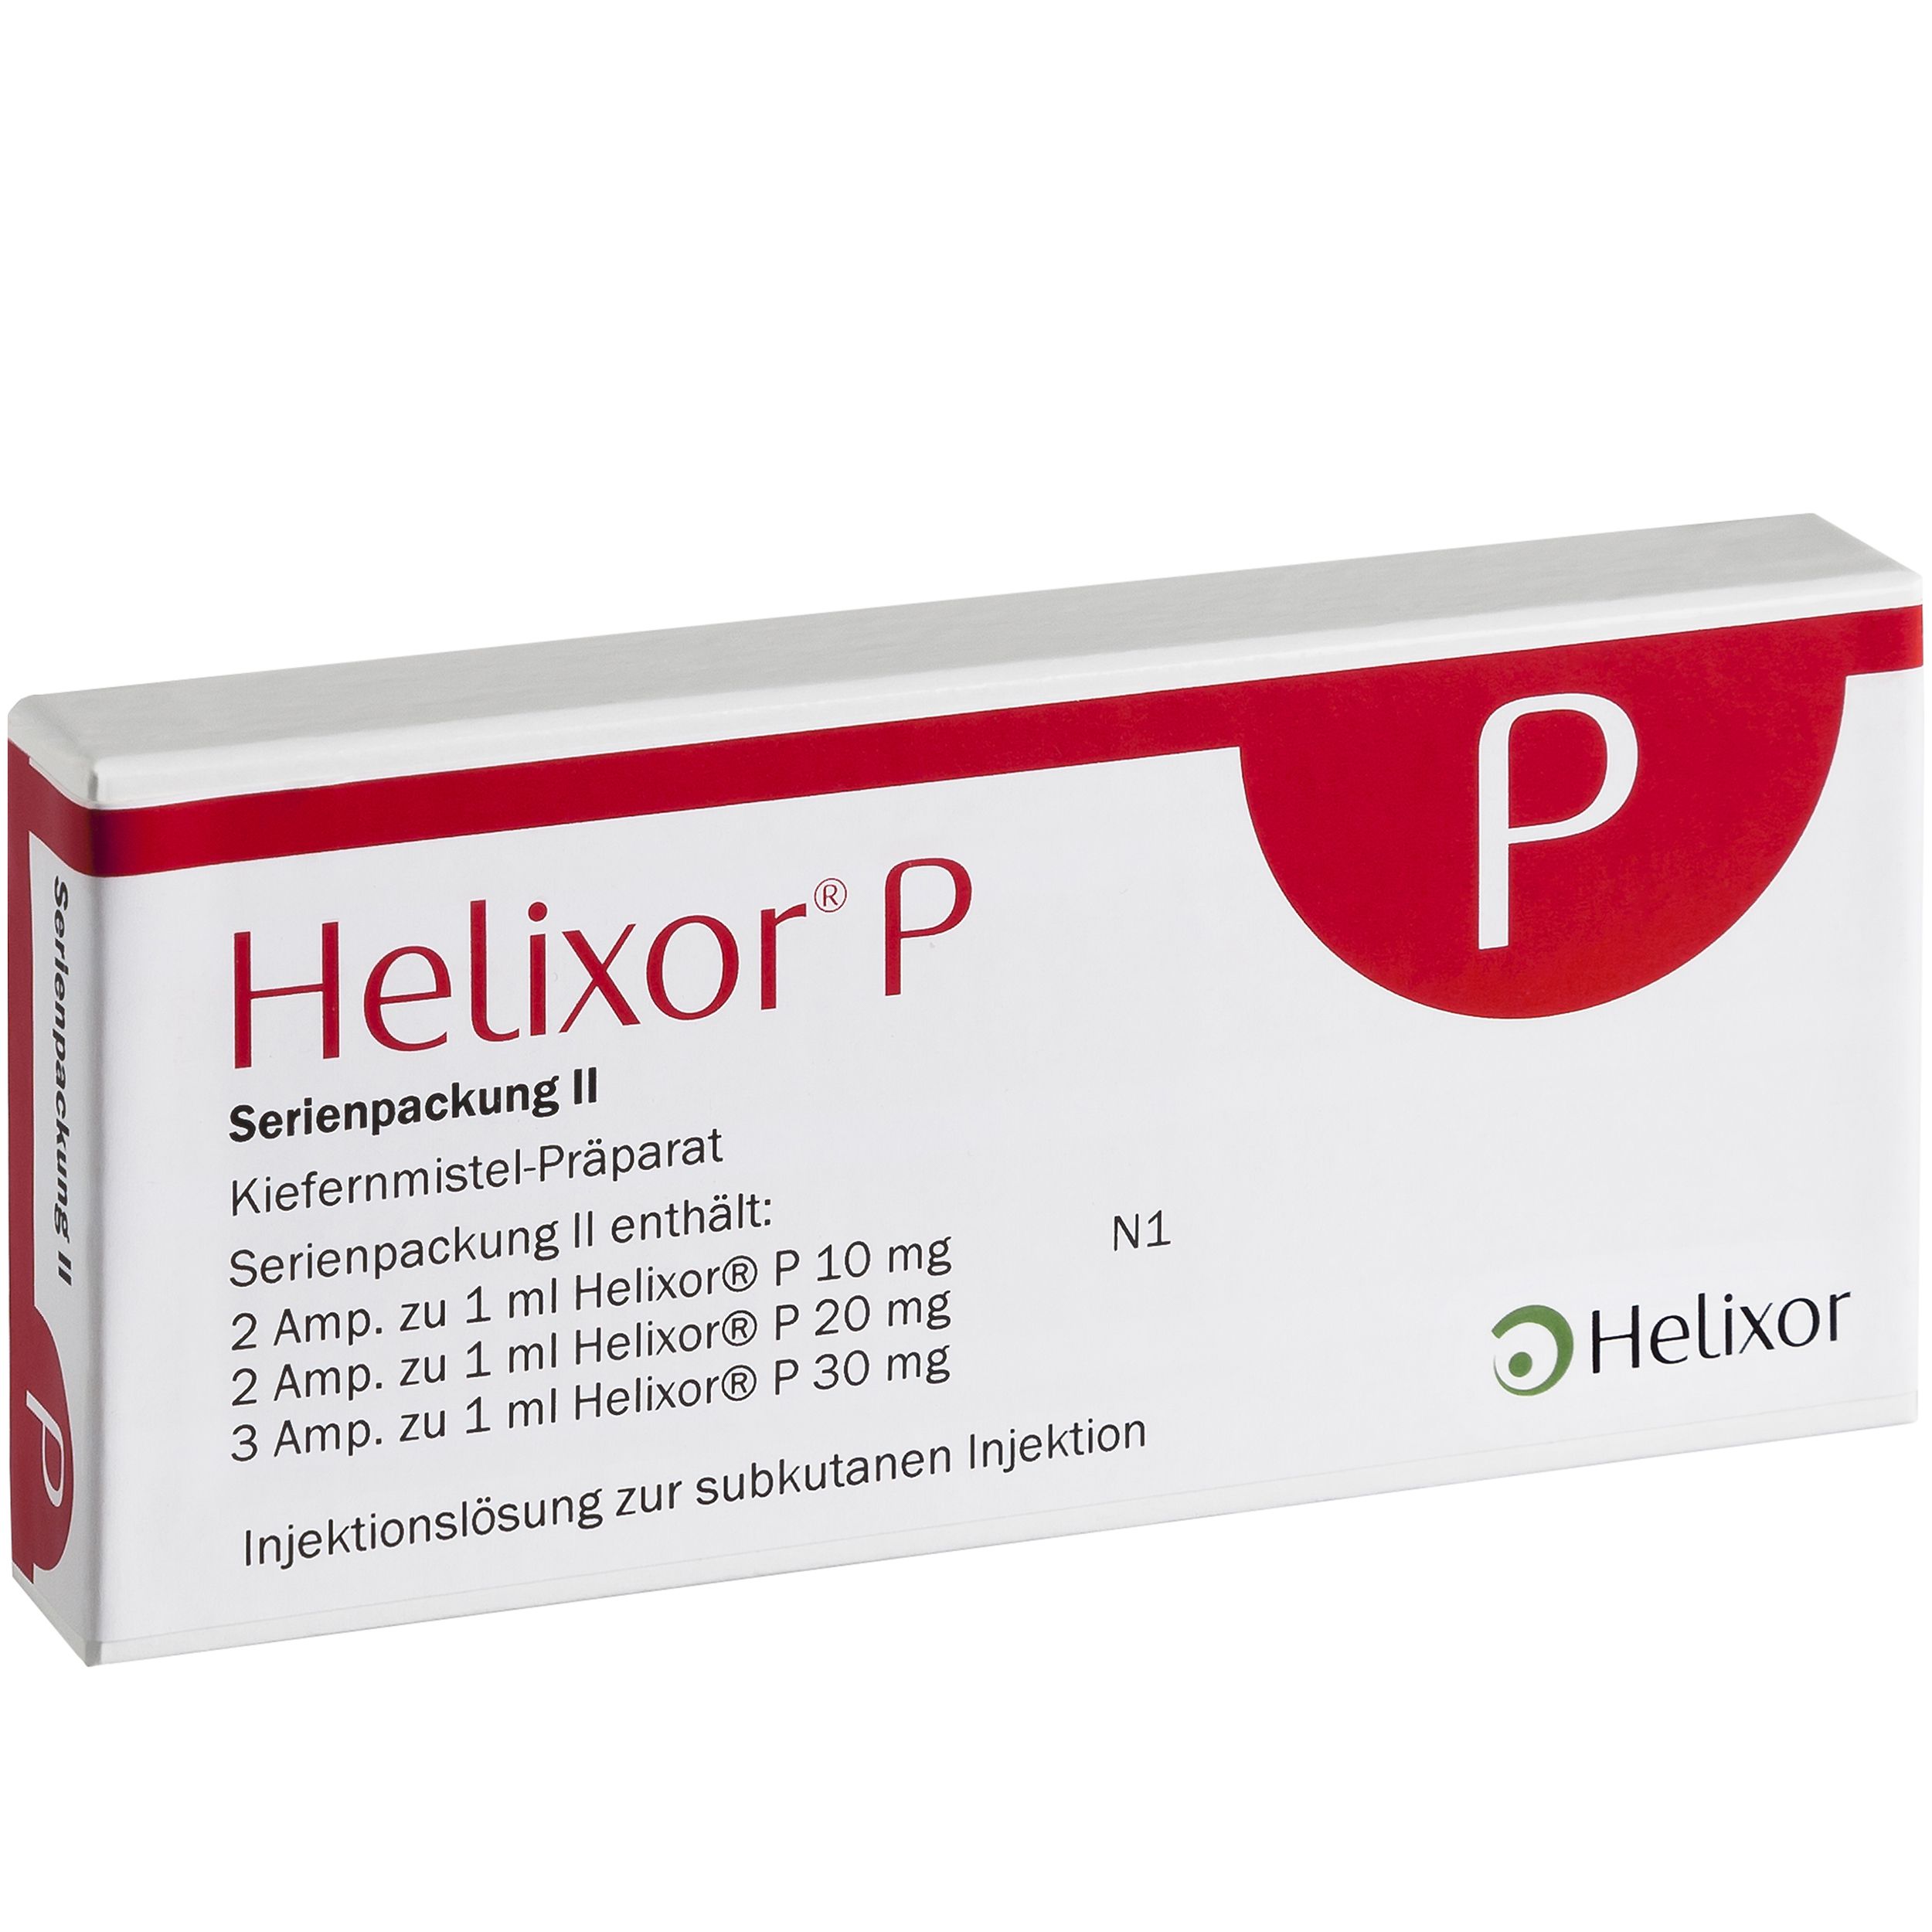 HELIXOR P series pack II ampoules